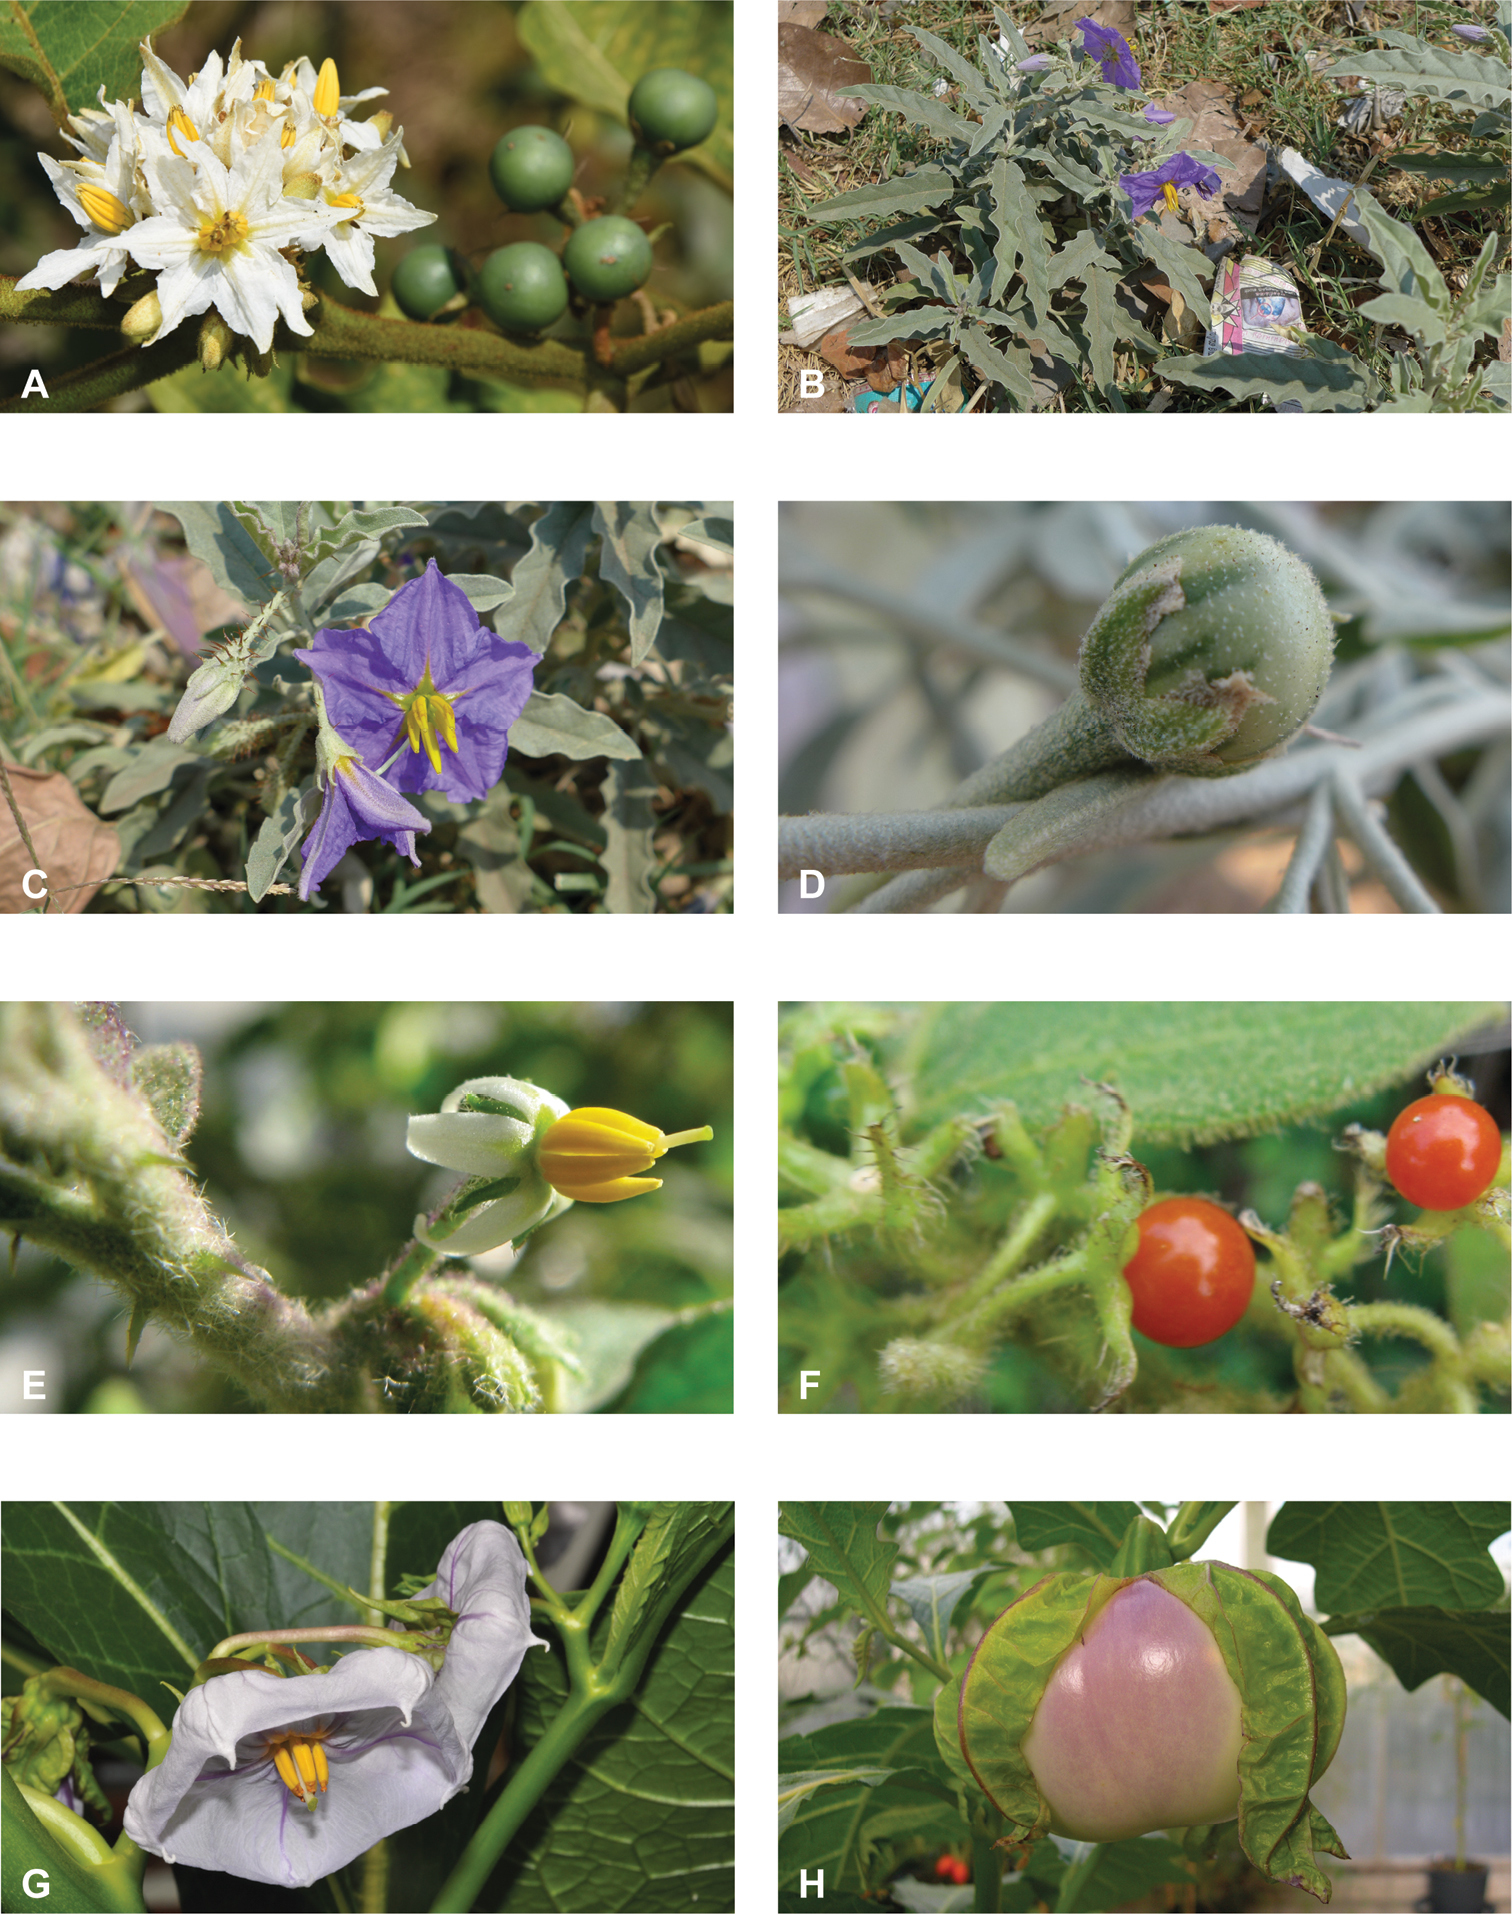 Frontiers  Taxonomic revision of Physalis in Mexico